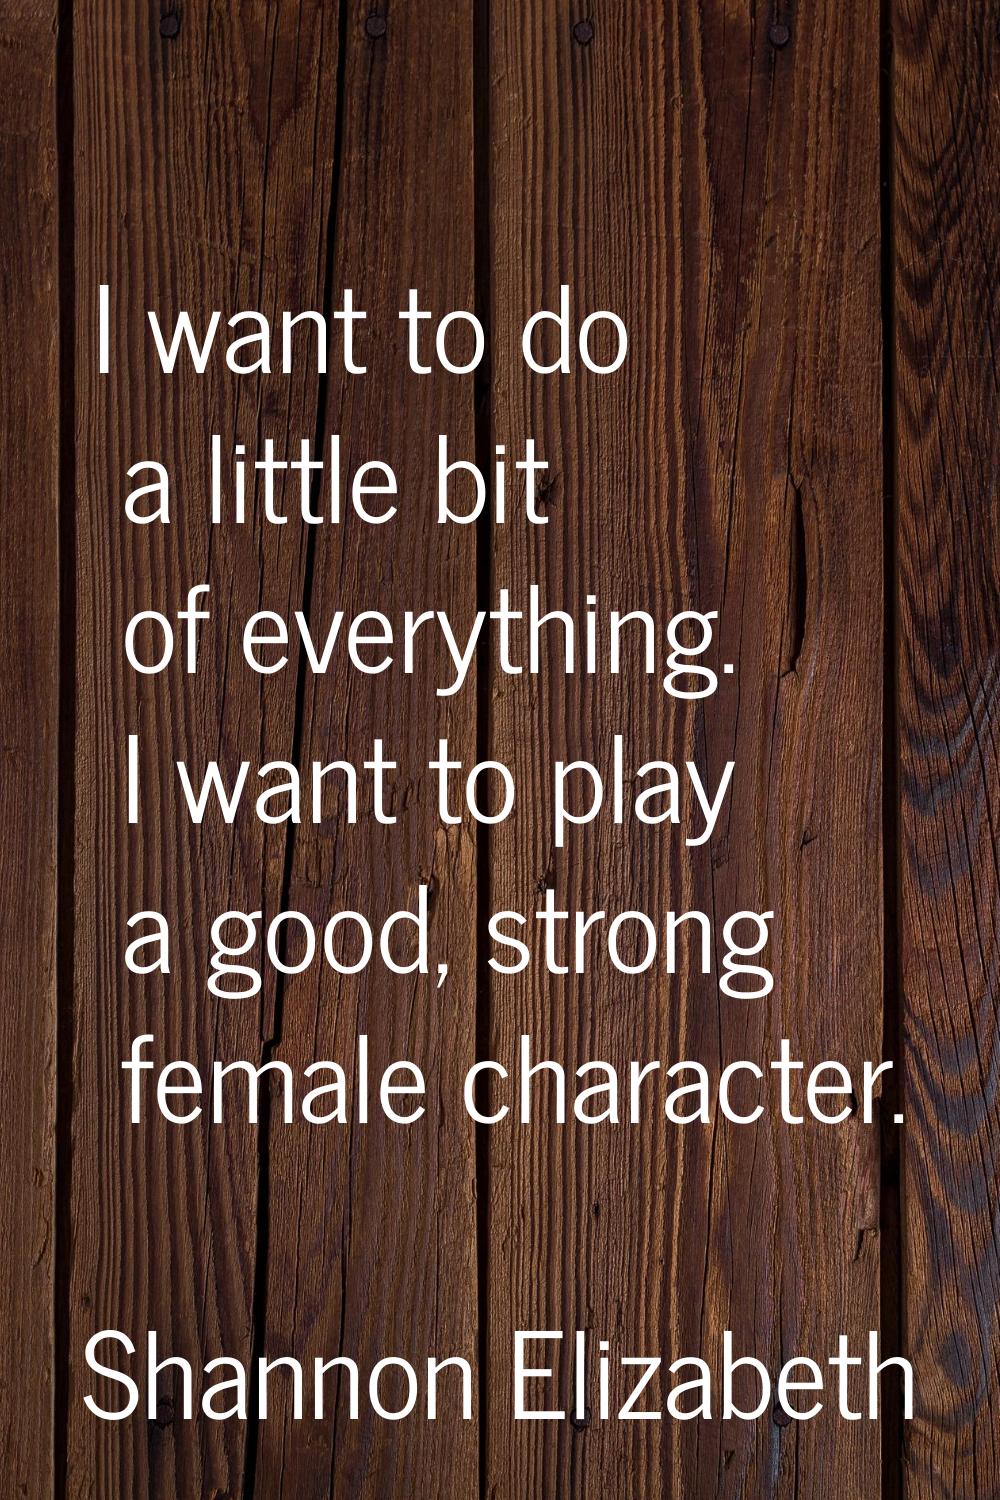 I want to do a little bit of everything. I want to play a good, strong female character.